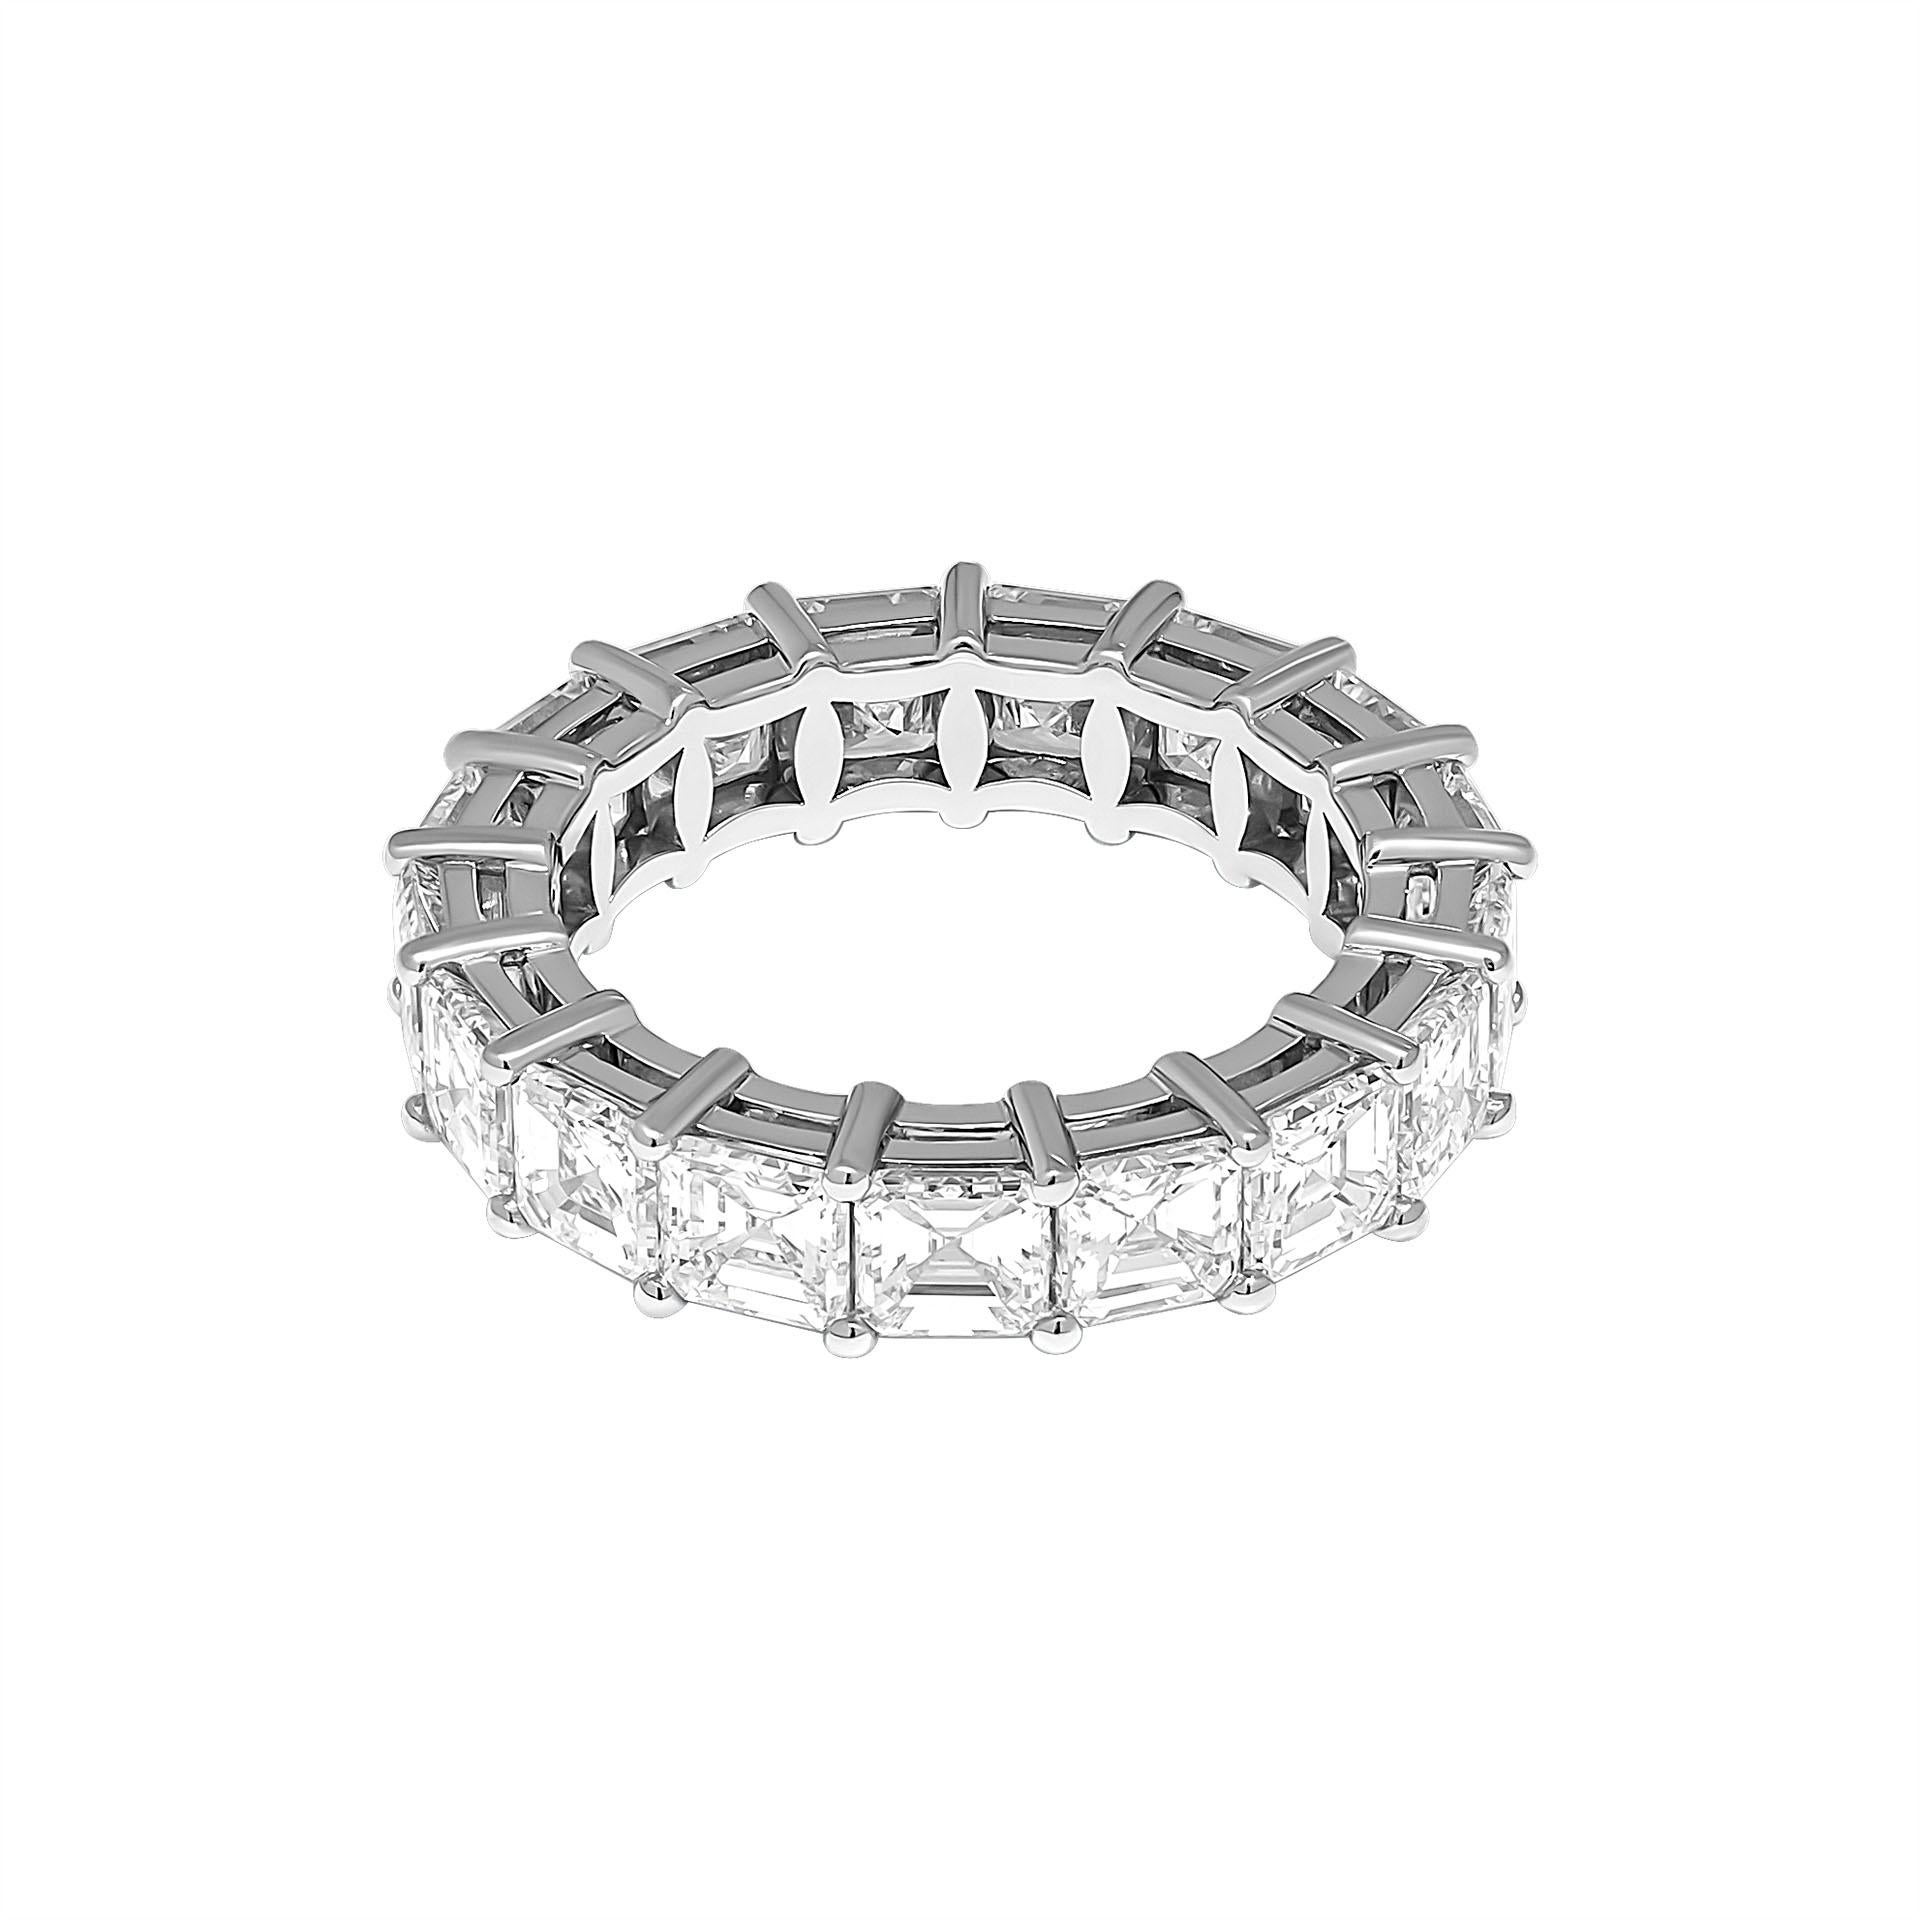 GIA Certified Anniversary eternity band with Square Emerald (Asscher) Diamonds set in Platinum 950; 
Size: 5 
17 stones 0.30-0.31ct each
Total Carat Weight: 5.15ct
Each stone is GIA certified:
0.31ct G VS2 GIA#2407659313 
0.30ct F VVS2